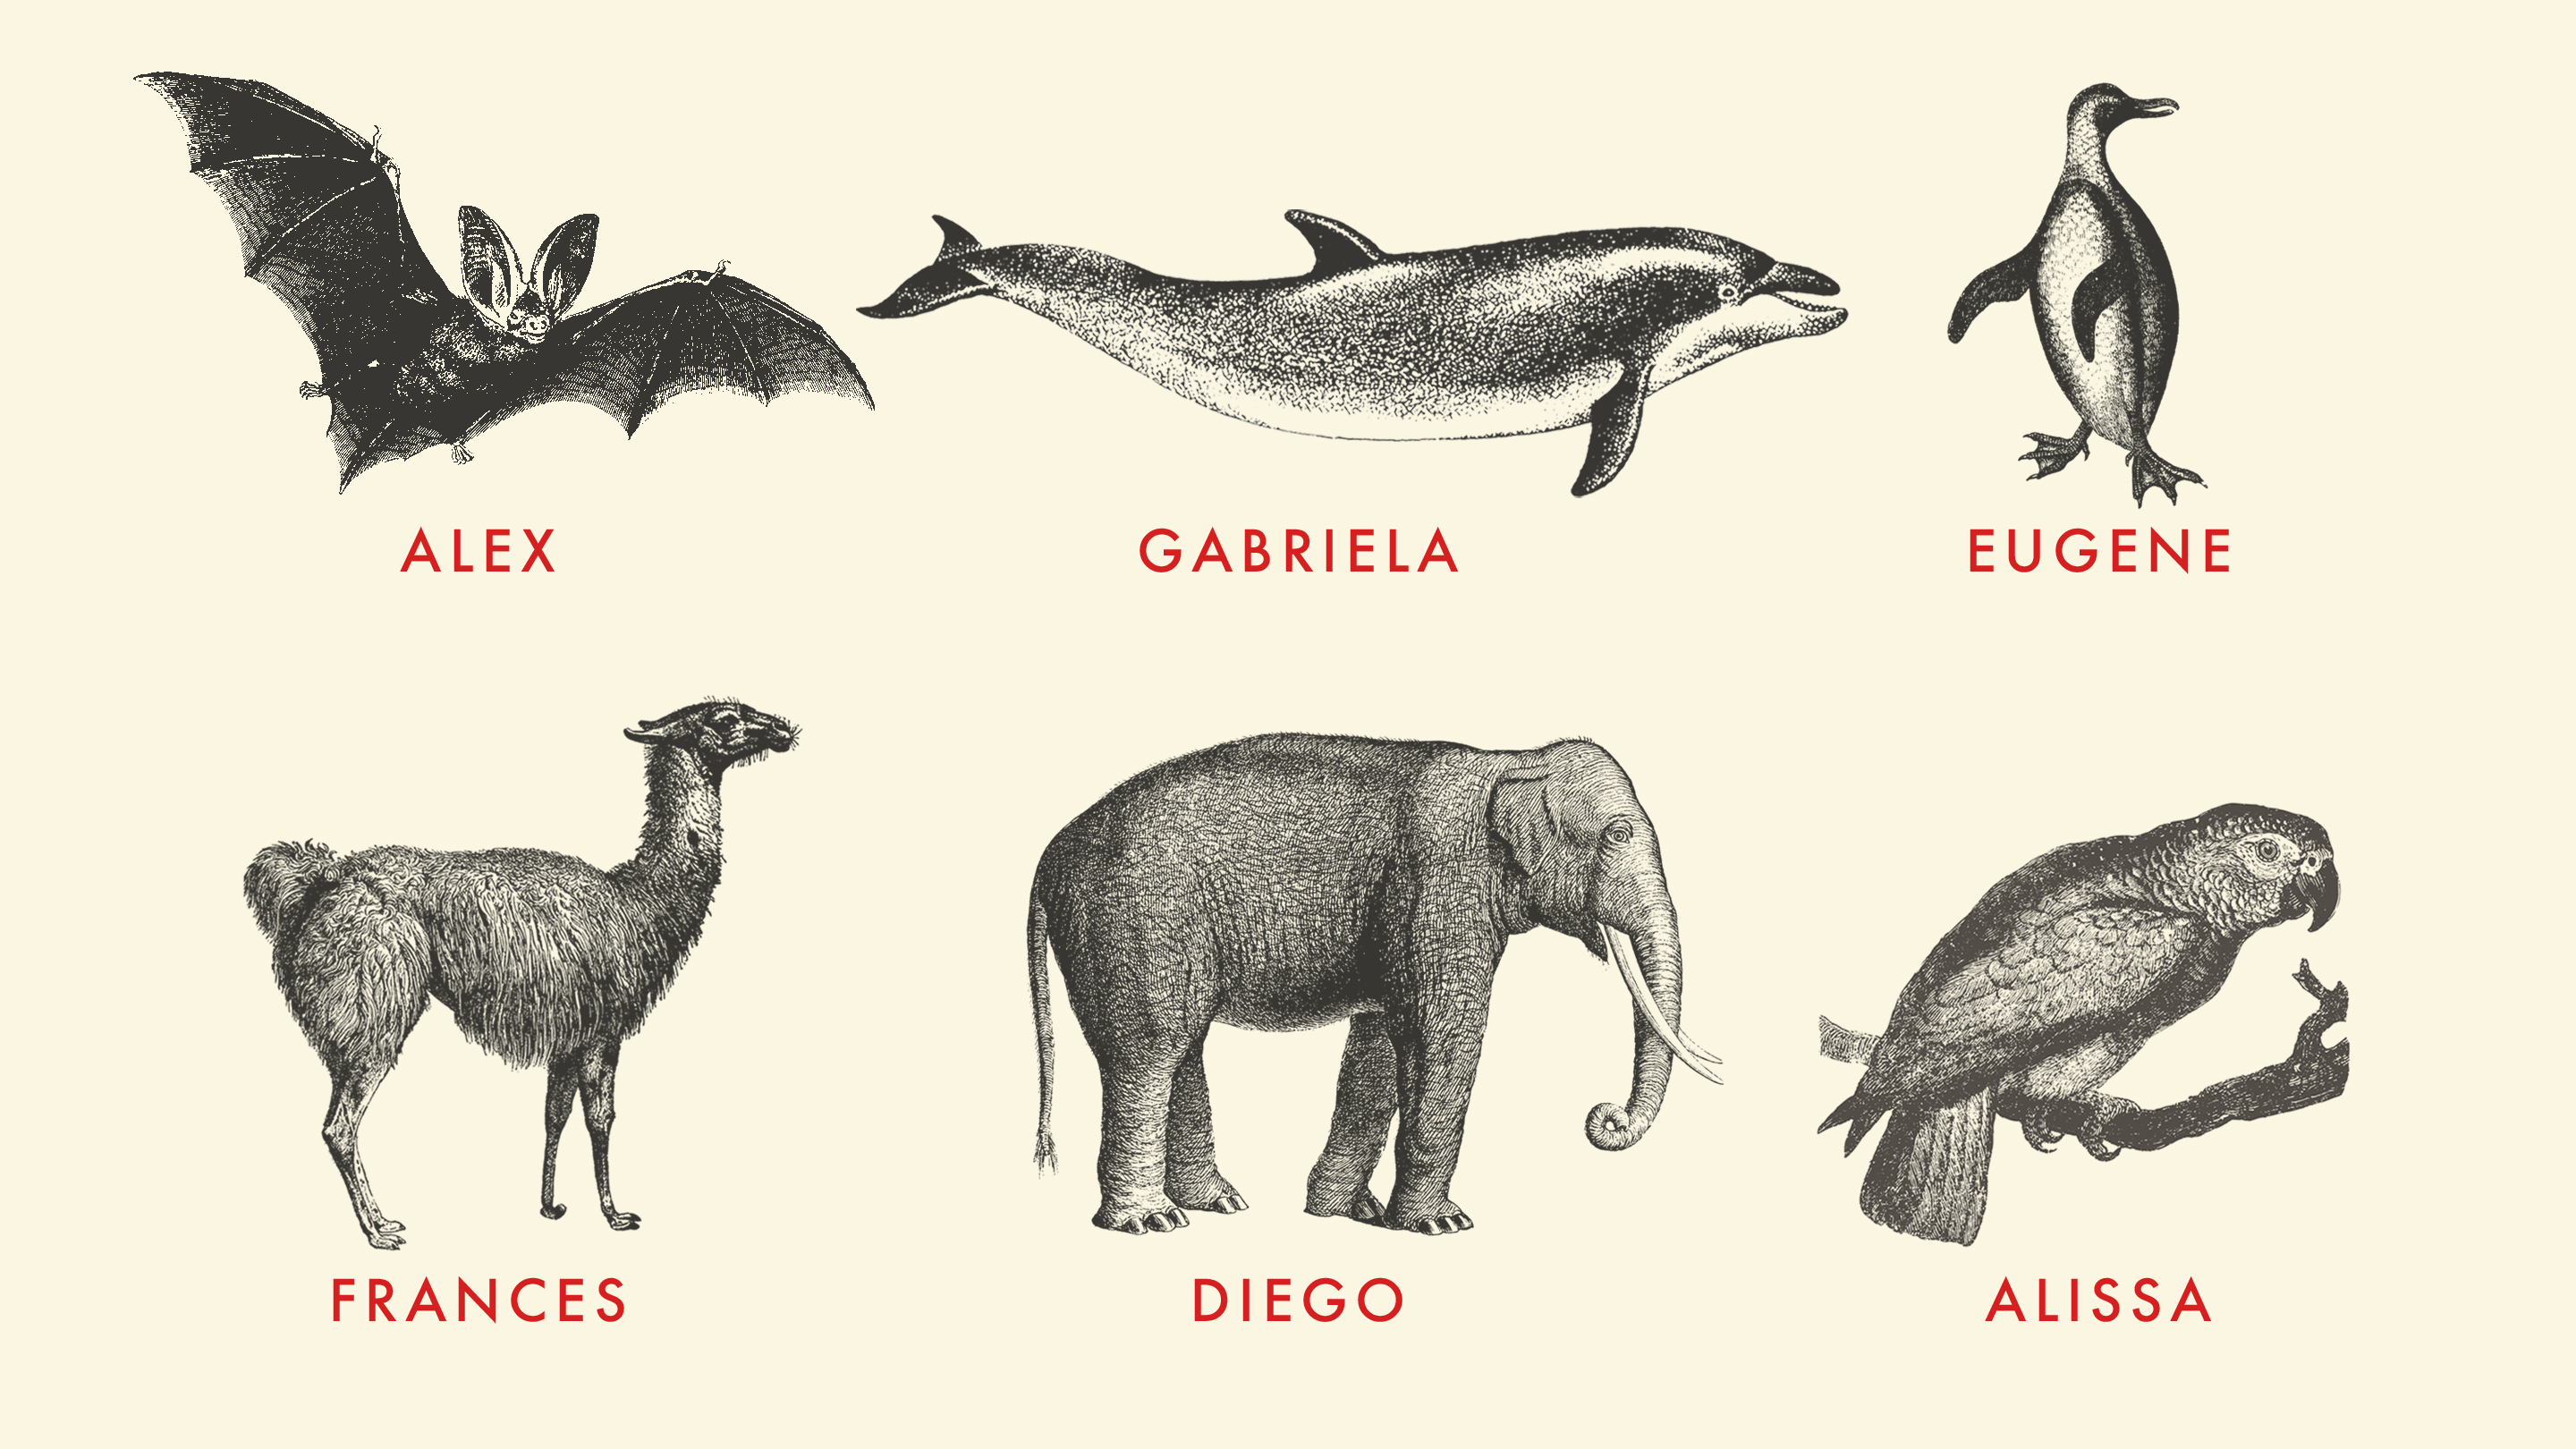 Illustration of a field guide with animals given human names: A bat named Alex, a dolphin named Gabriela, a penguin named Eugene, a guanaco named Frances, an elephant named Diego, and a parrot named Alissa